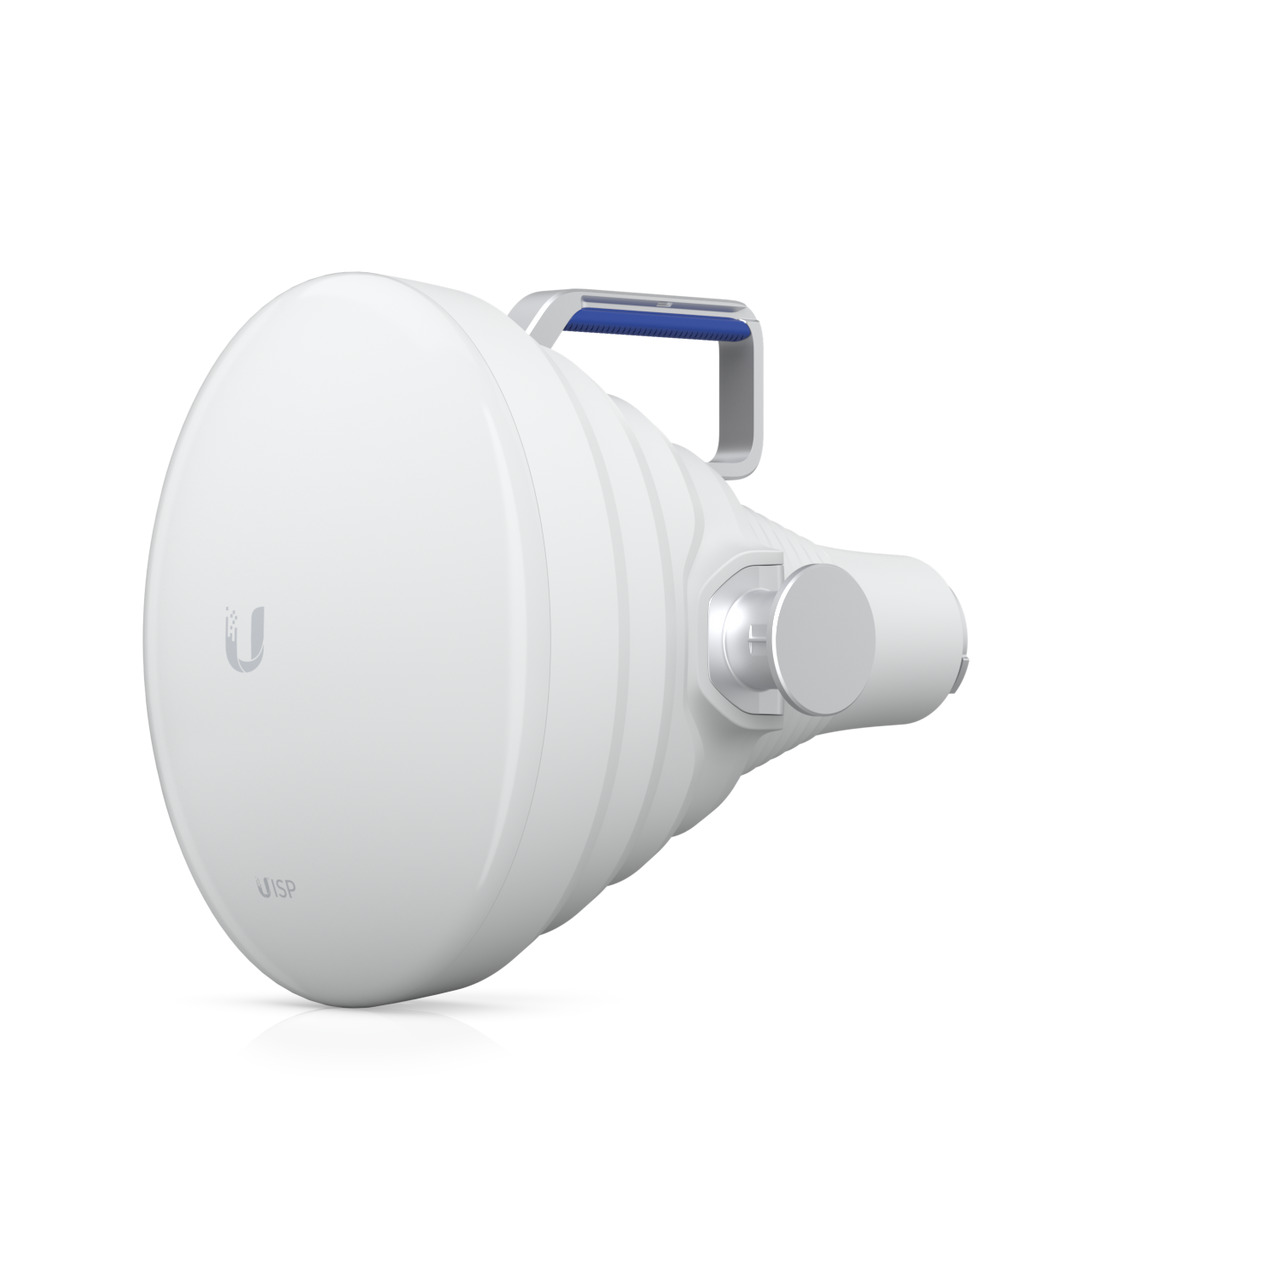 Ubiquiti UISP Horn, High-isolation 30°, Point-to-multipoint (PtMP), 5.15 - 6.875